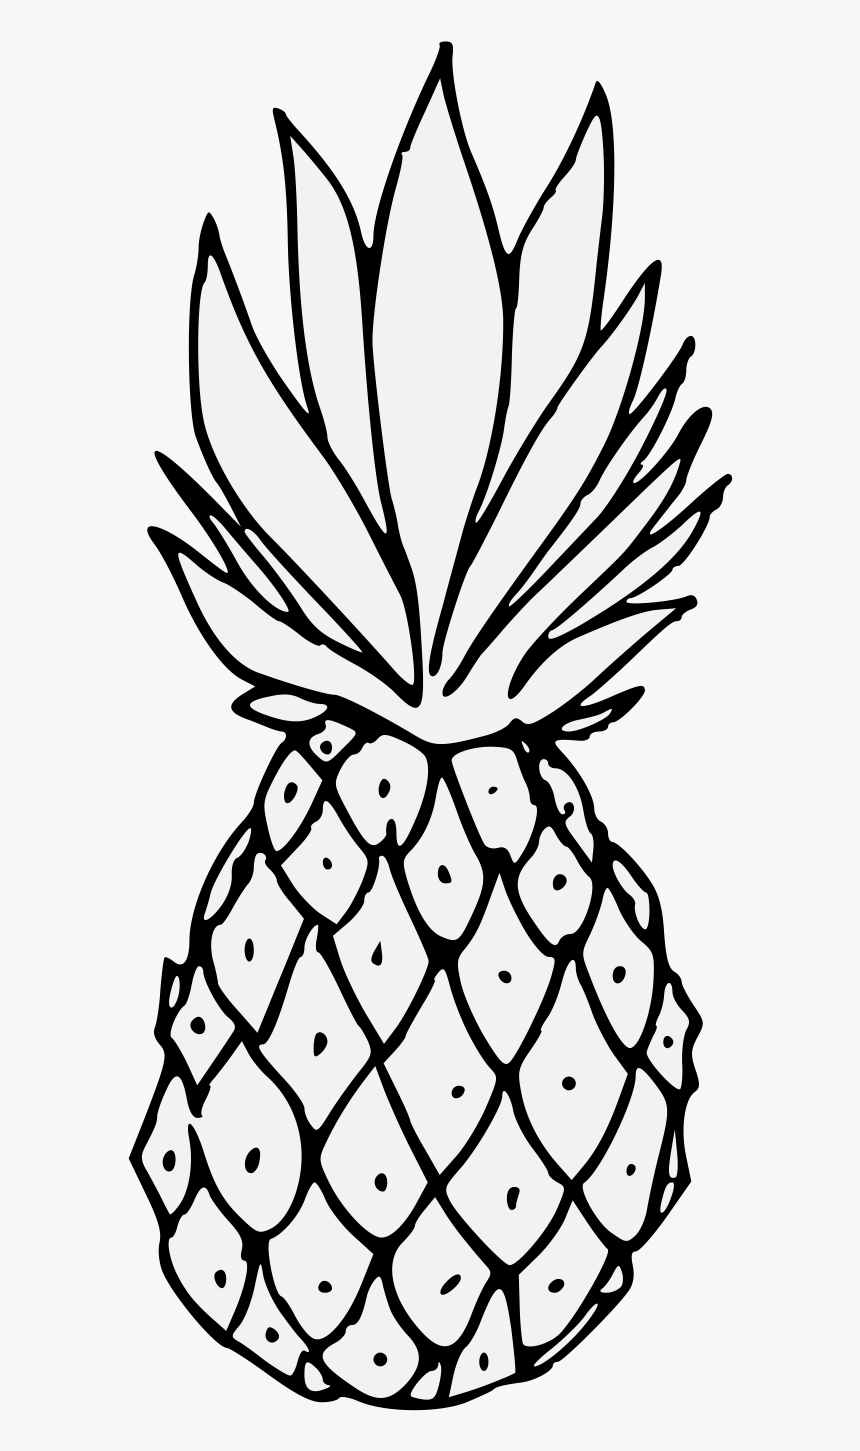 How To Draw Pineapple Emoji Step by Step - [9 Easy Phase]